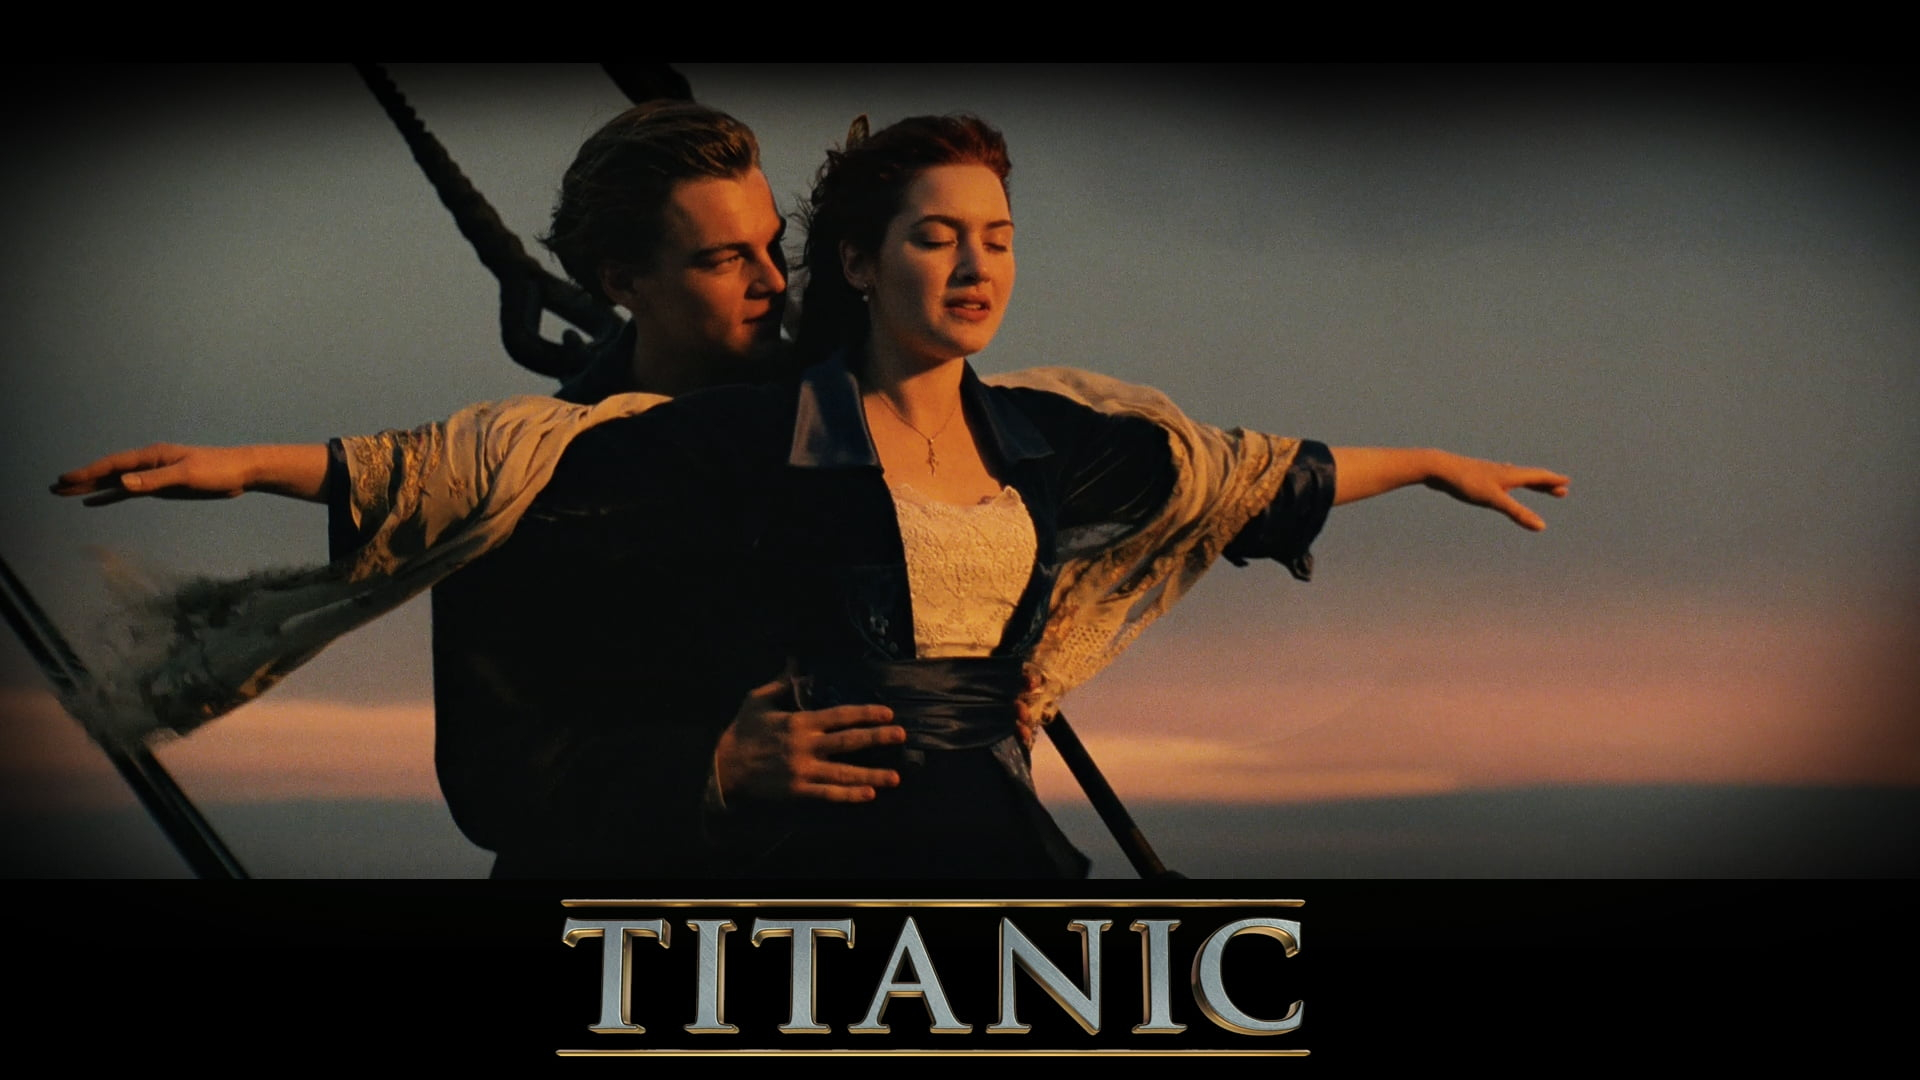 1920x1080 Titanic Jack and Rose on boat HD wallpaper